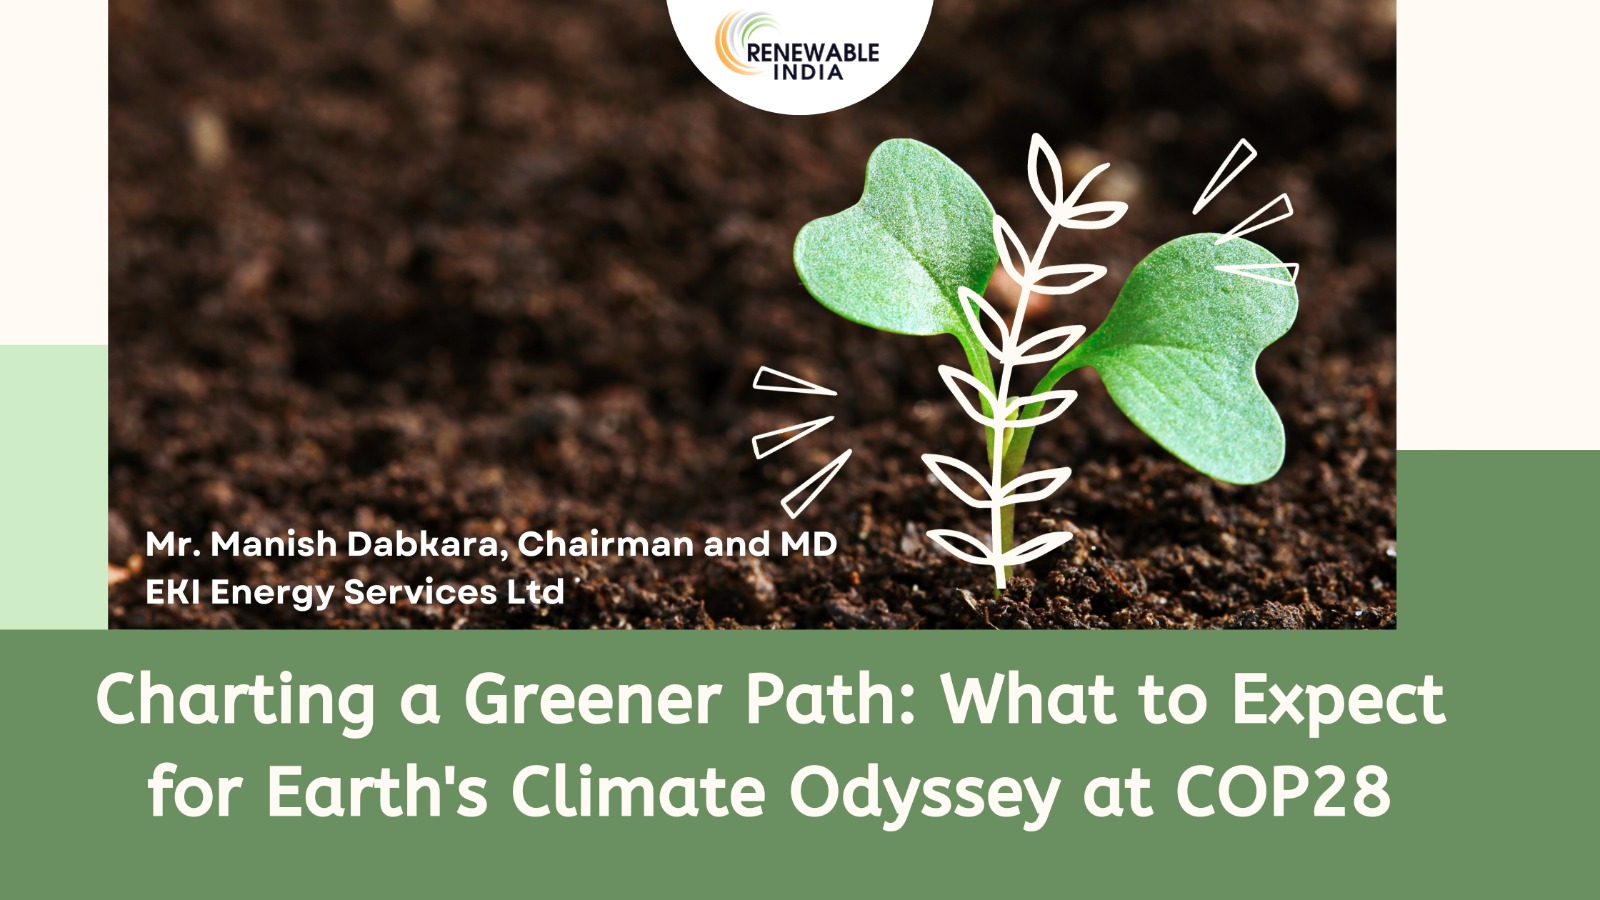 Charting a Greener Path: What to Expect for Earth’s Climate Odyssey at COP28